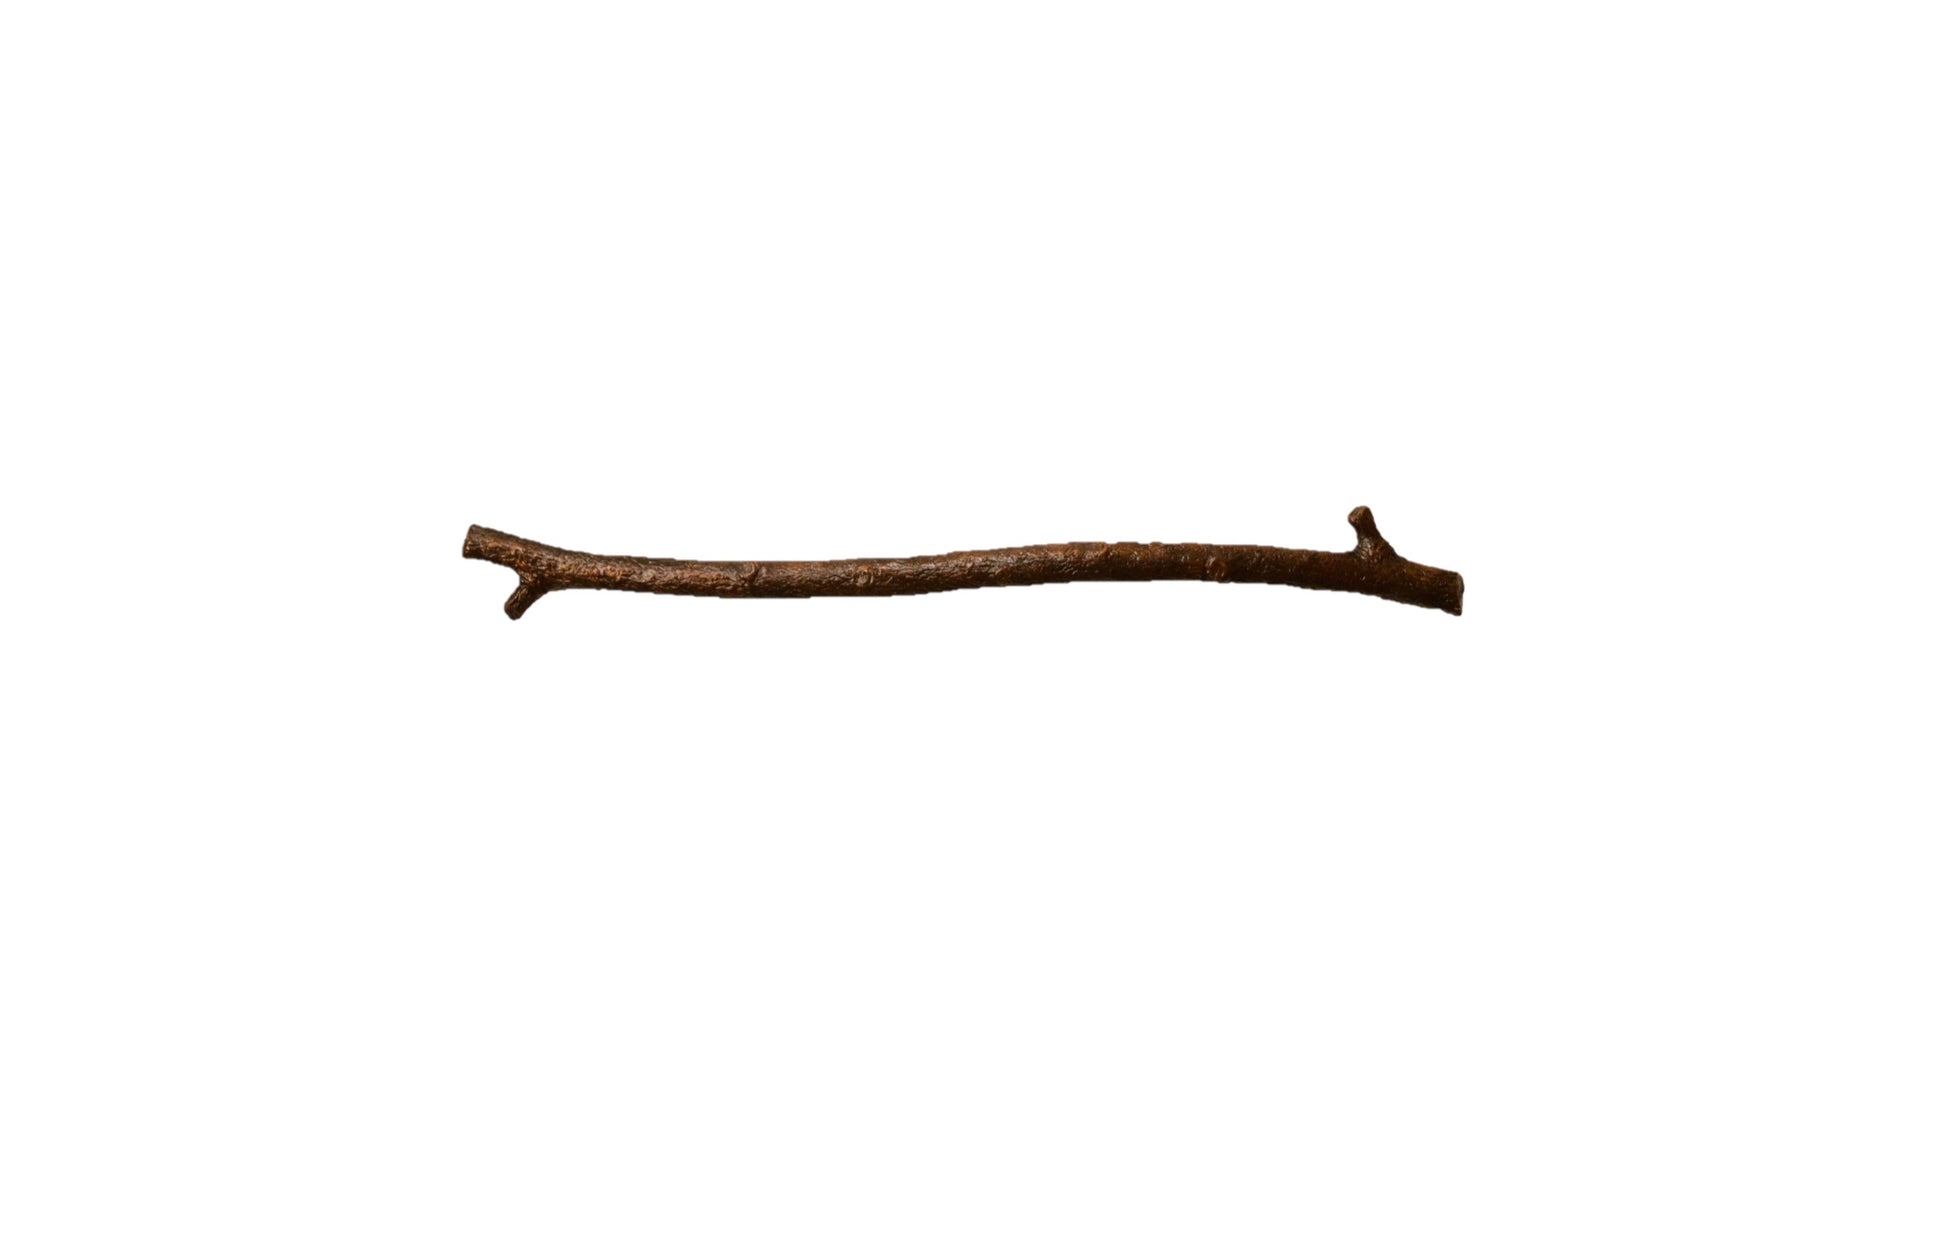 Appliance handles fashioned from willow branches are solid bronze